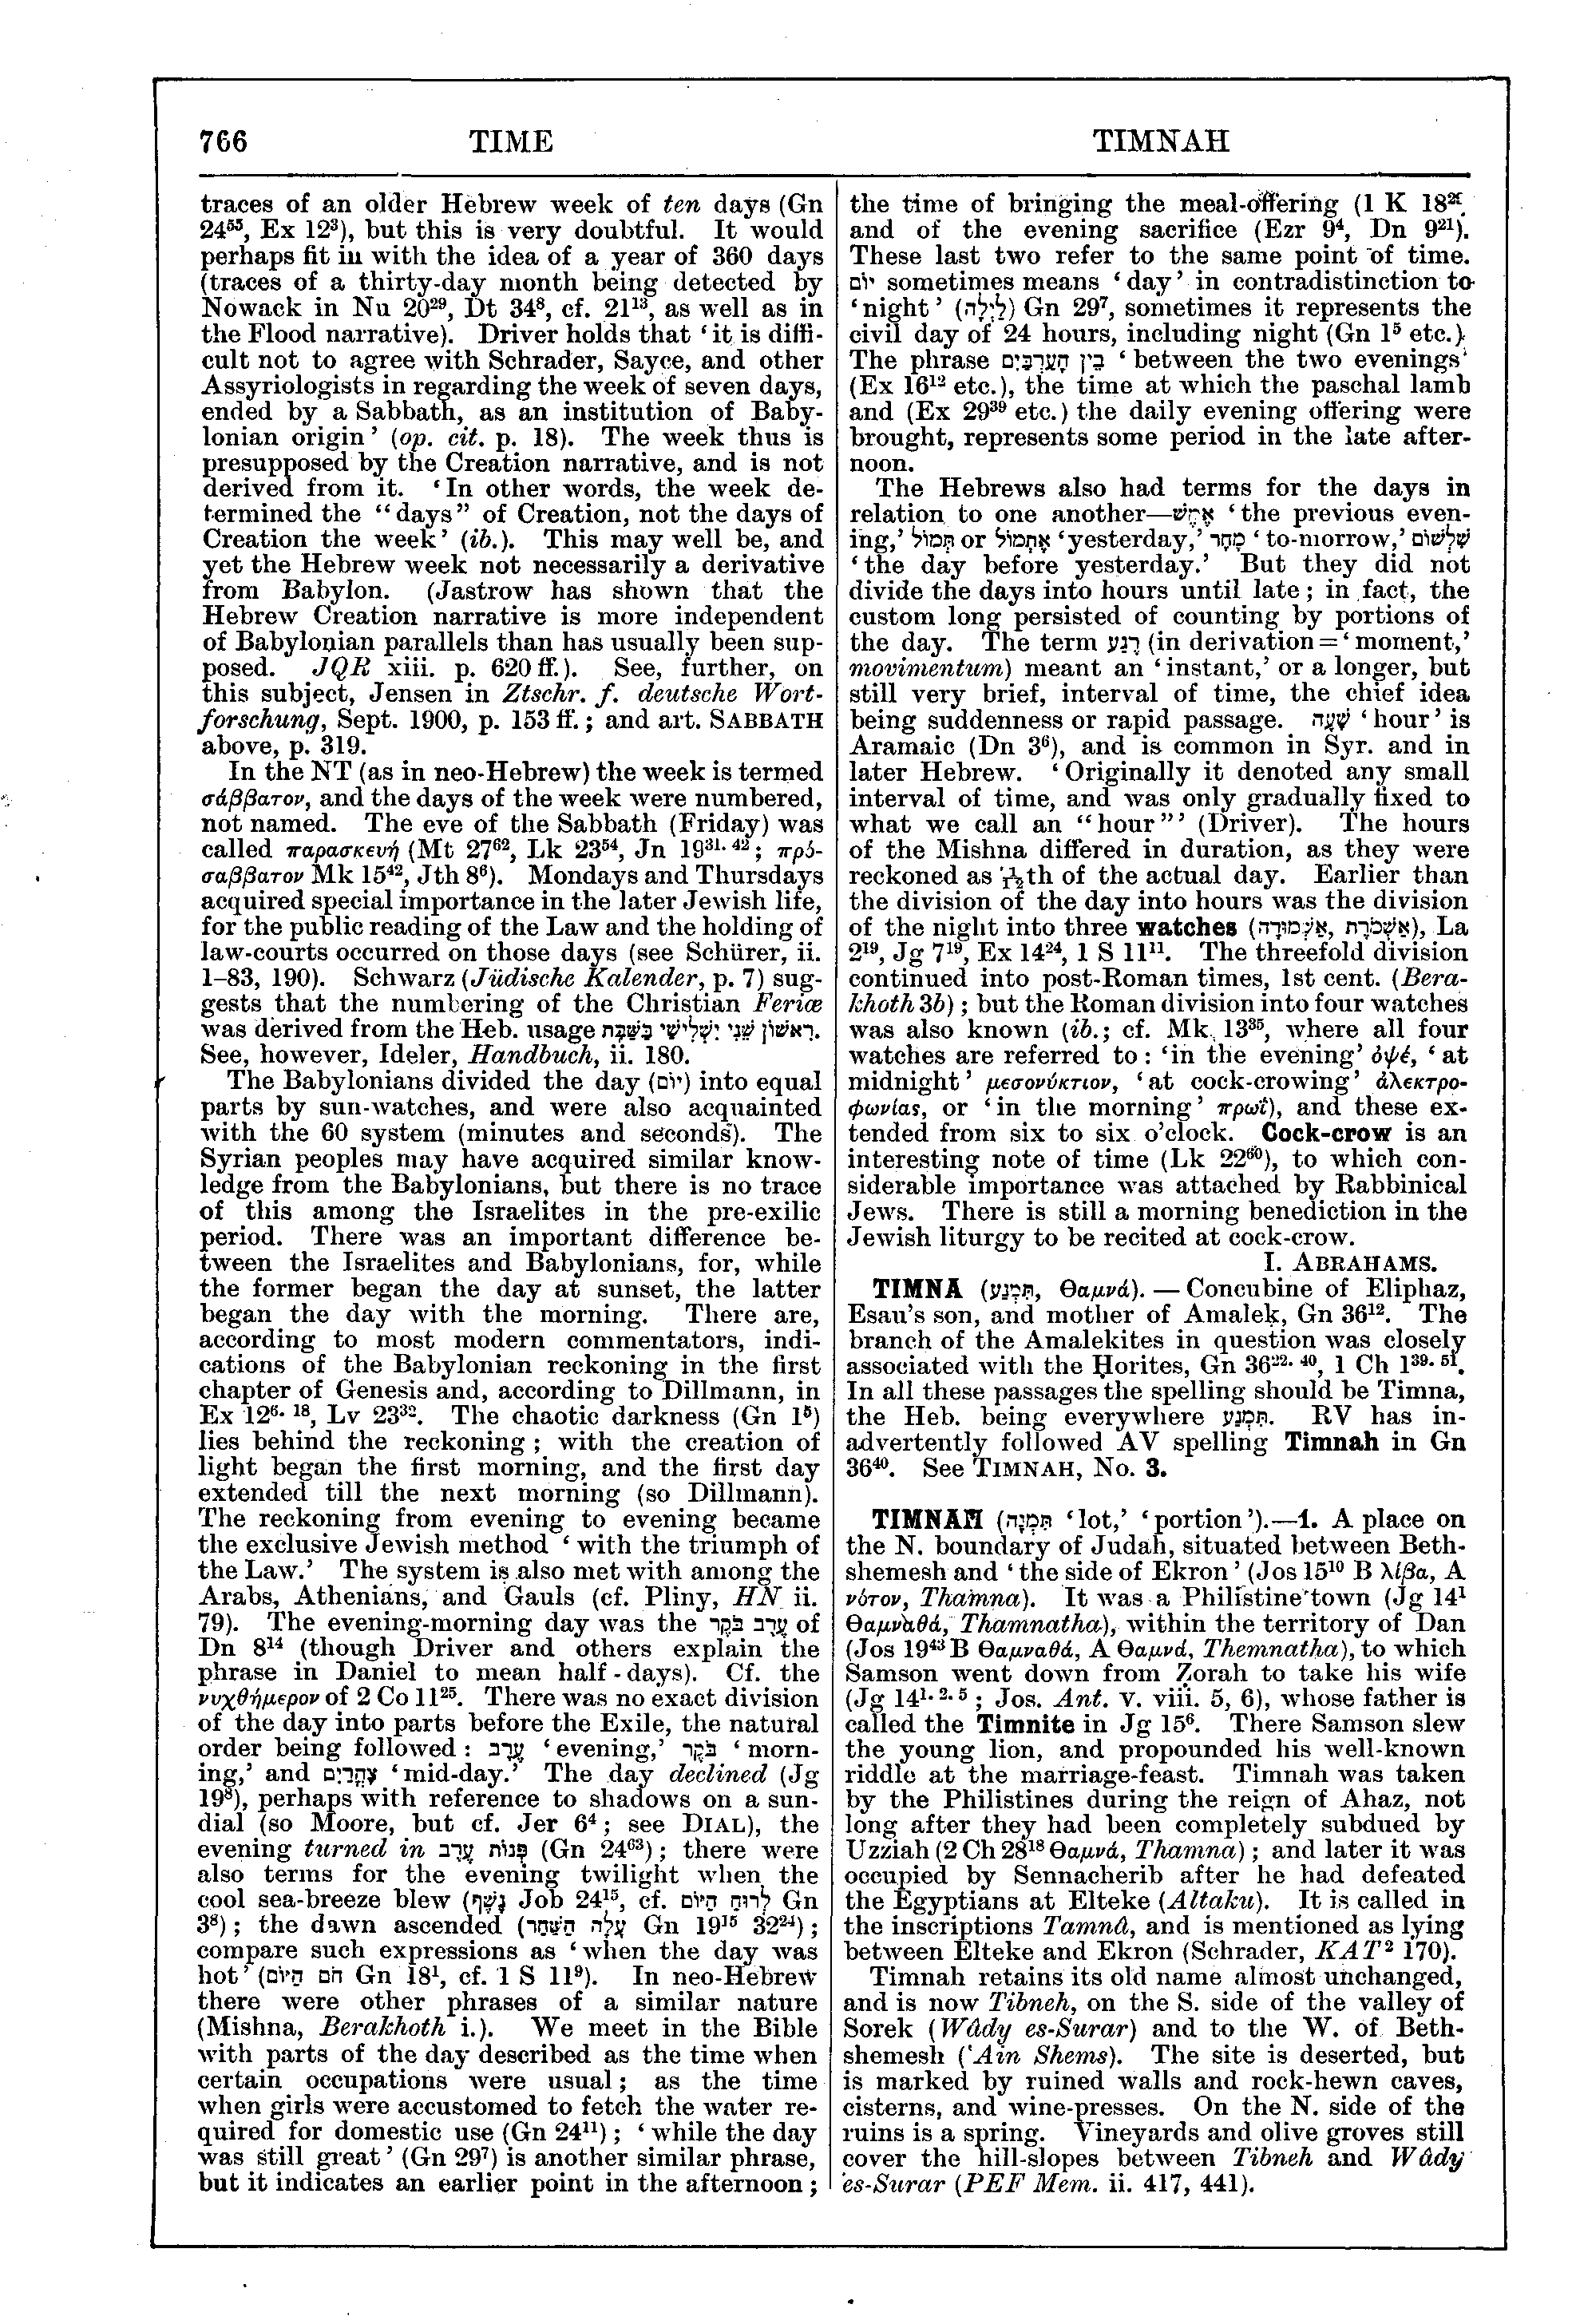 Image of page 766